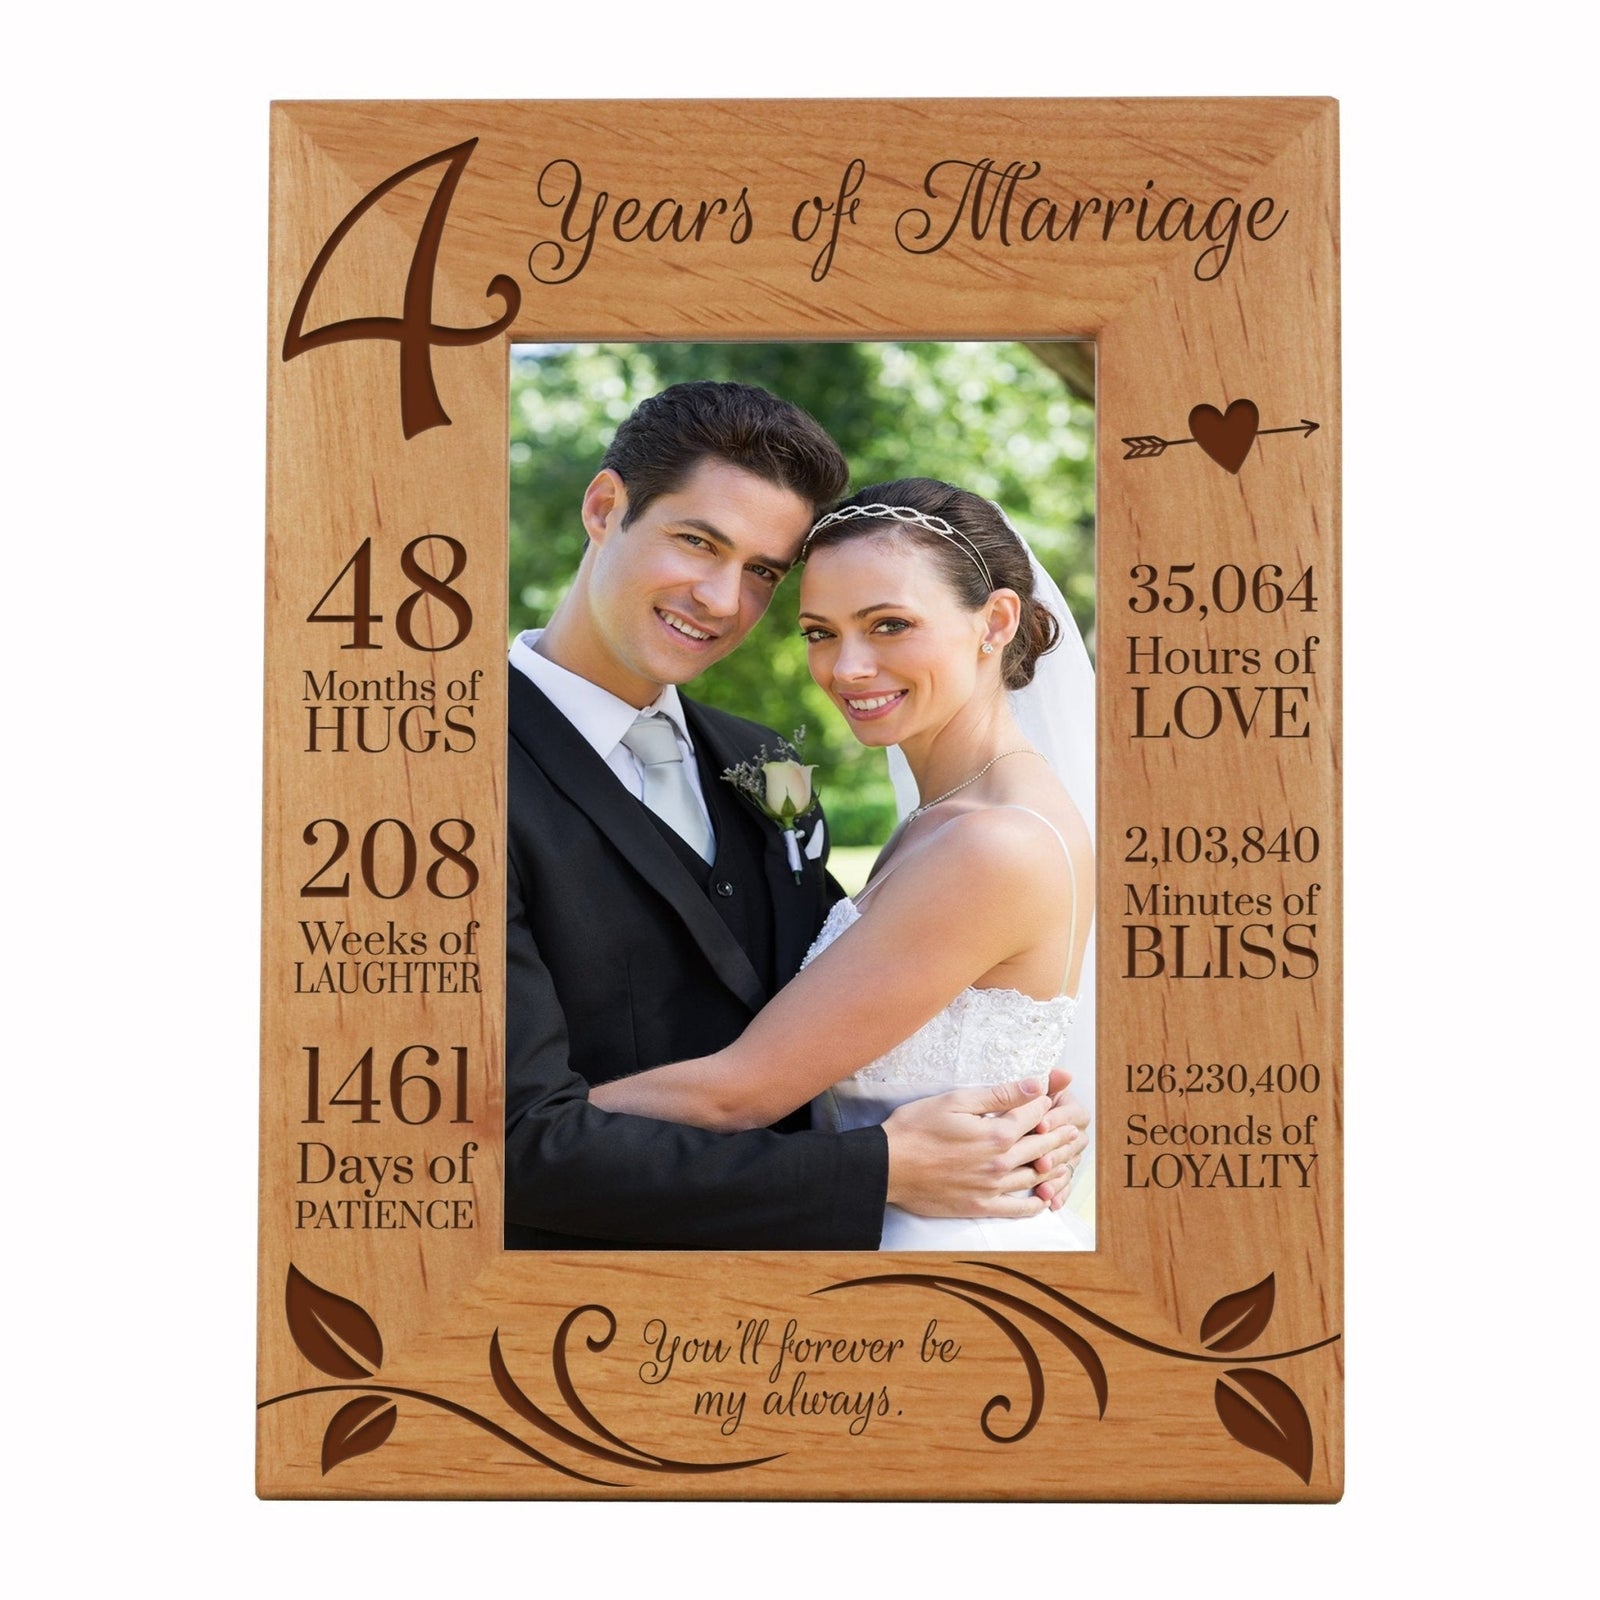 Engraved 4th Wedding Anniversary Photo Frame Wall Decor Gift for Couples - Forever Be My Always - LifeSong Milestones